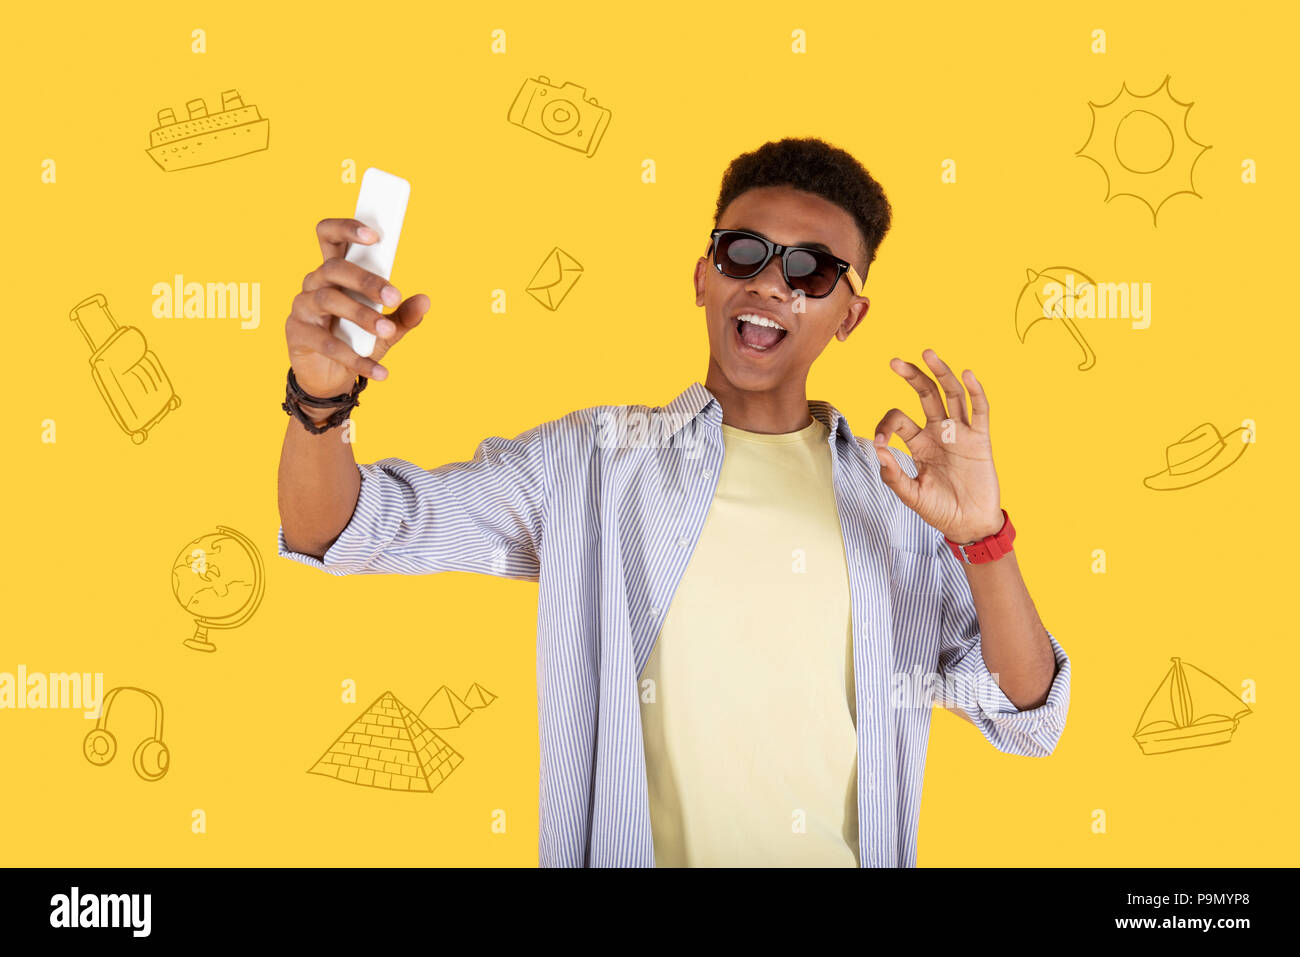 Optimistic boy winking his eye and smiling while taking a selfie Stock Photo